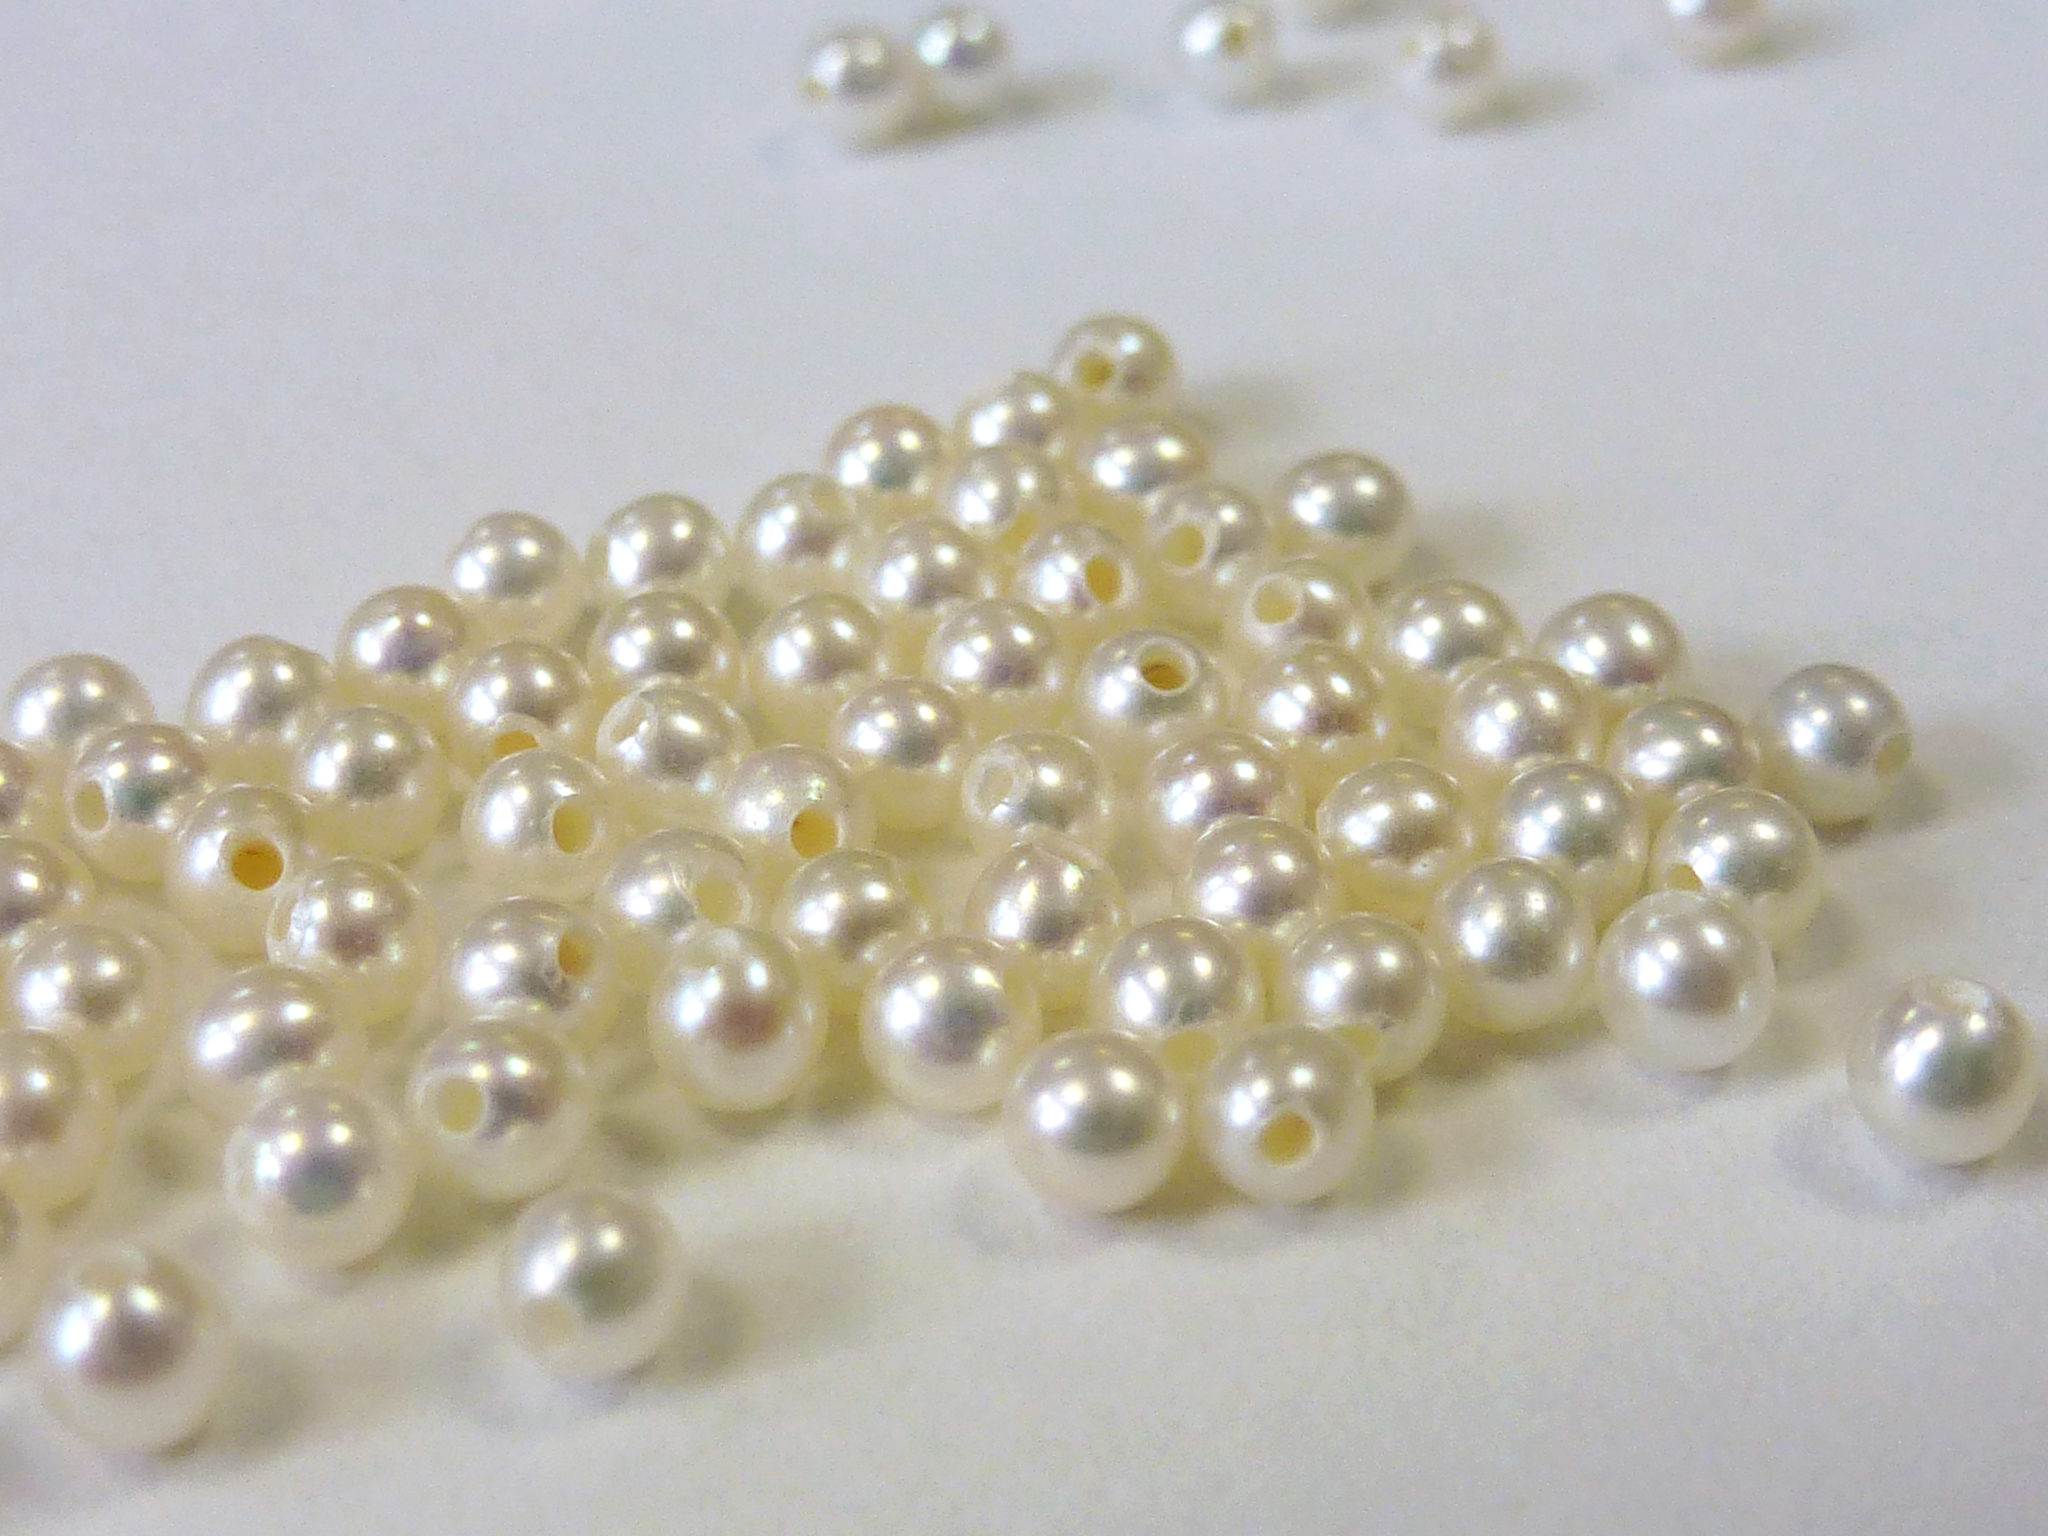 HALF DRILLED FRESHWATER PEARLS